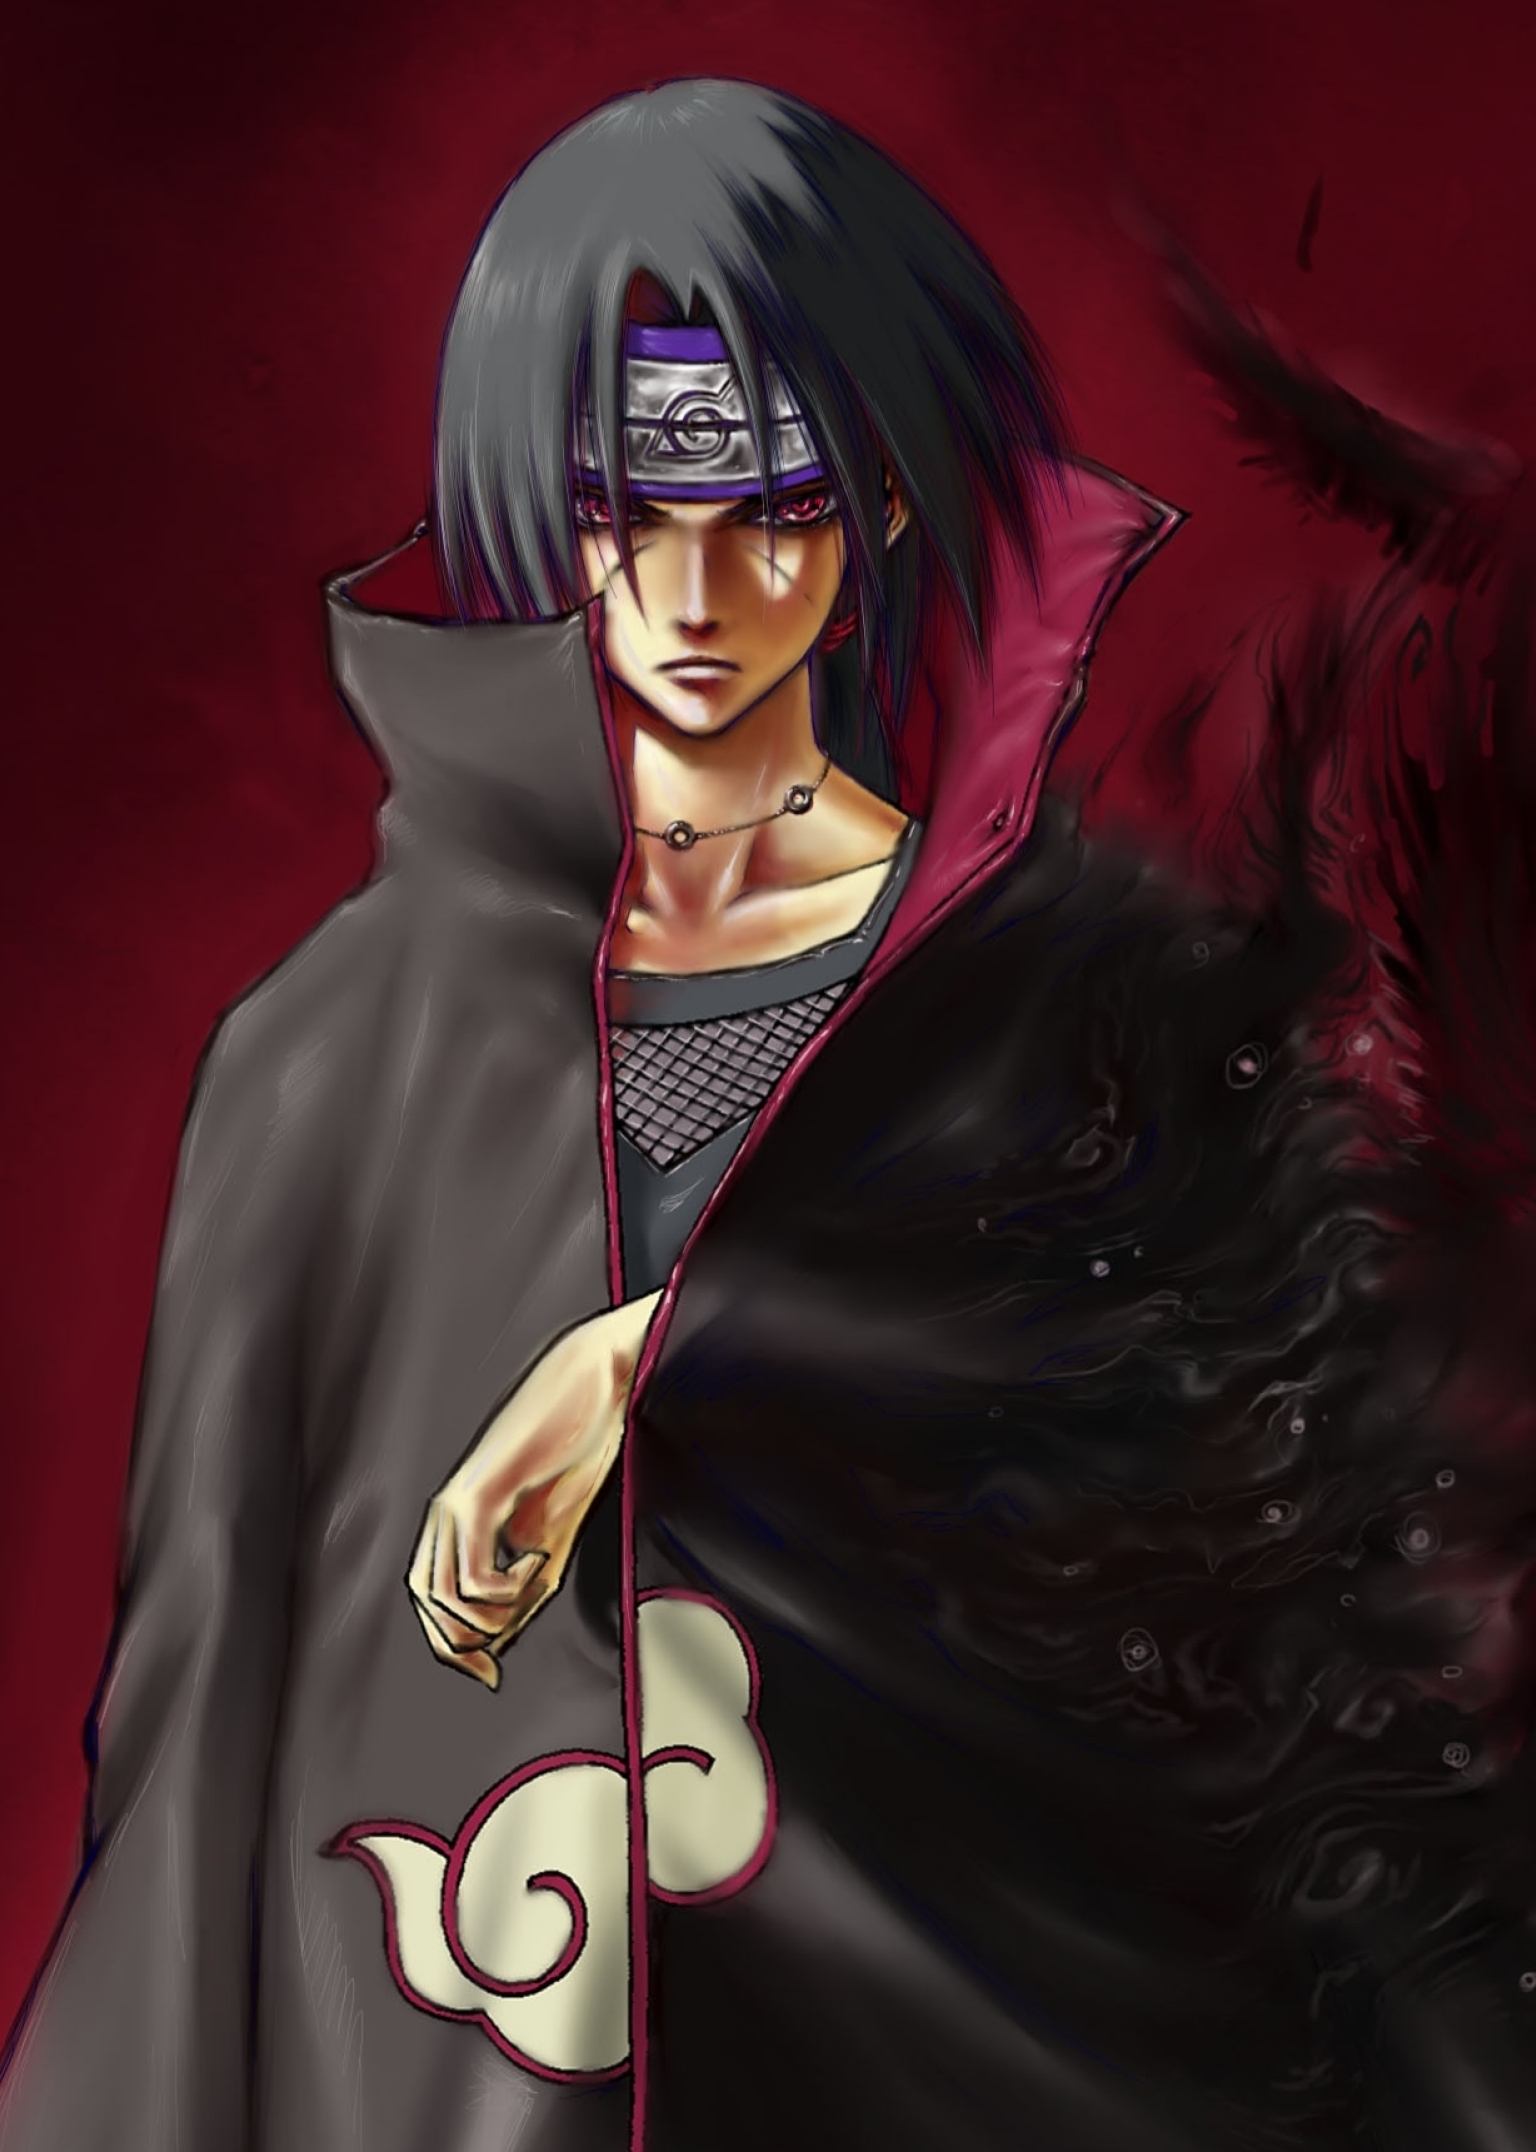 79 naruto itachi wallpapers images in full hd, 2k and 4k sizes. 